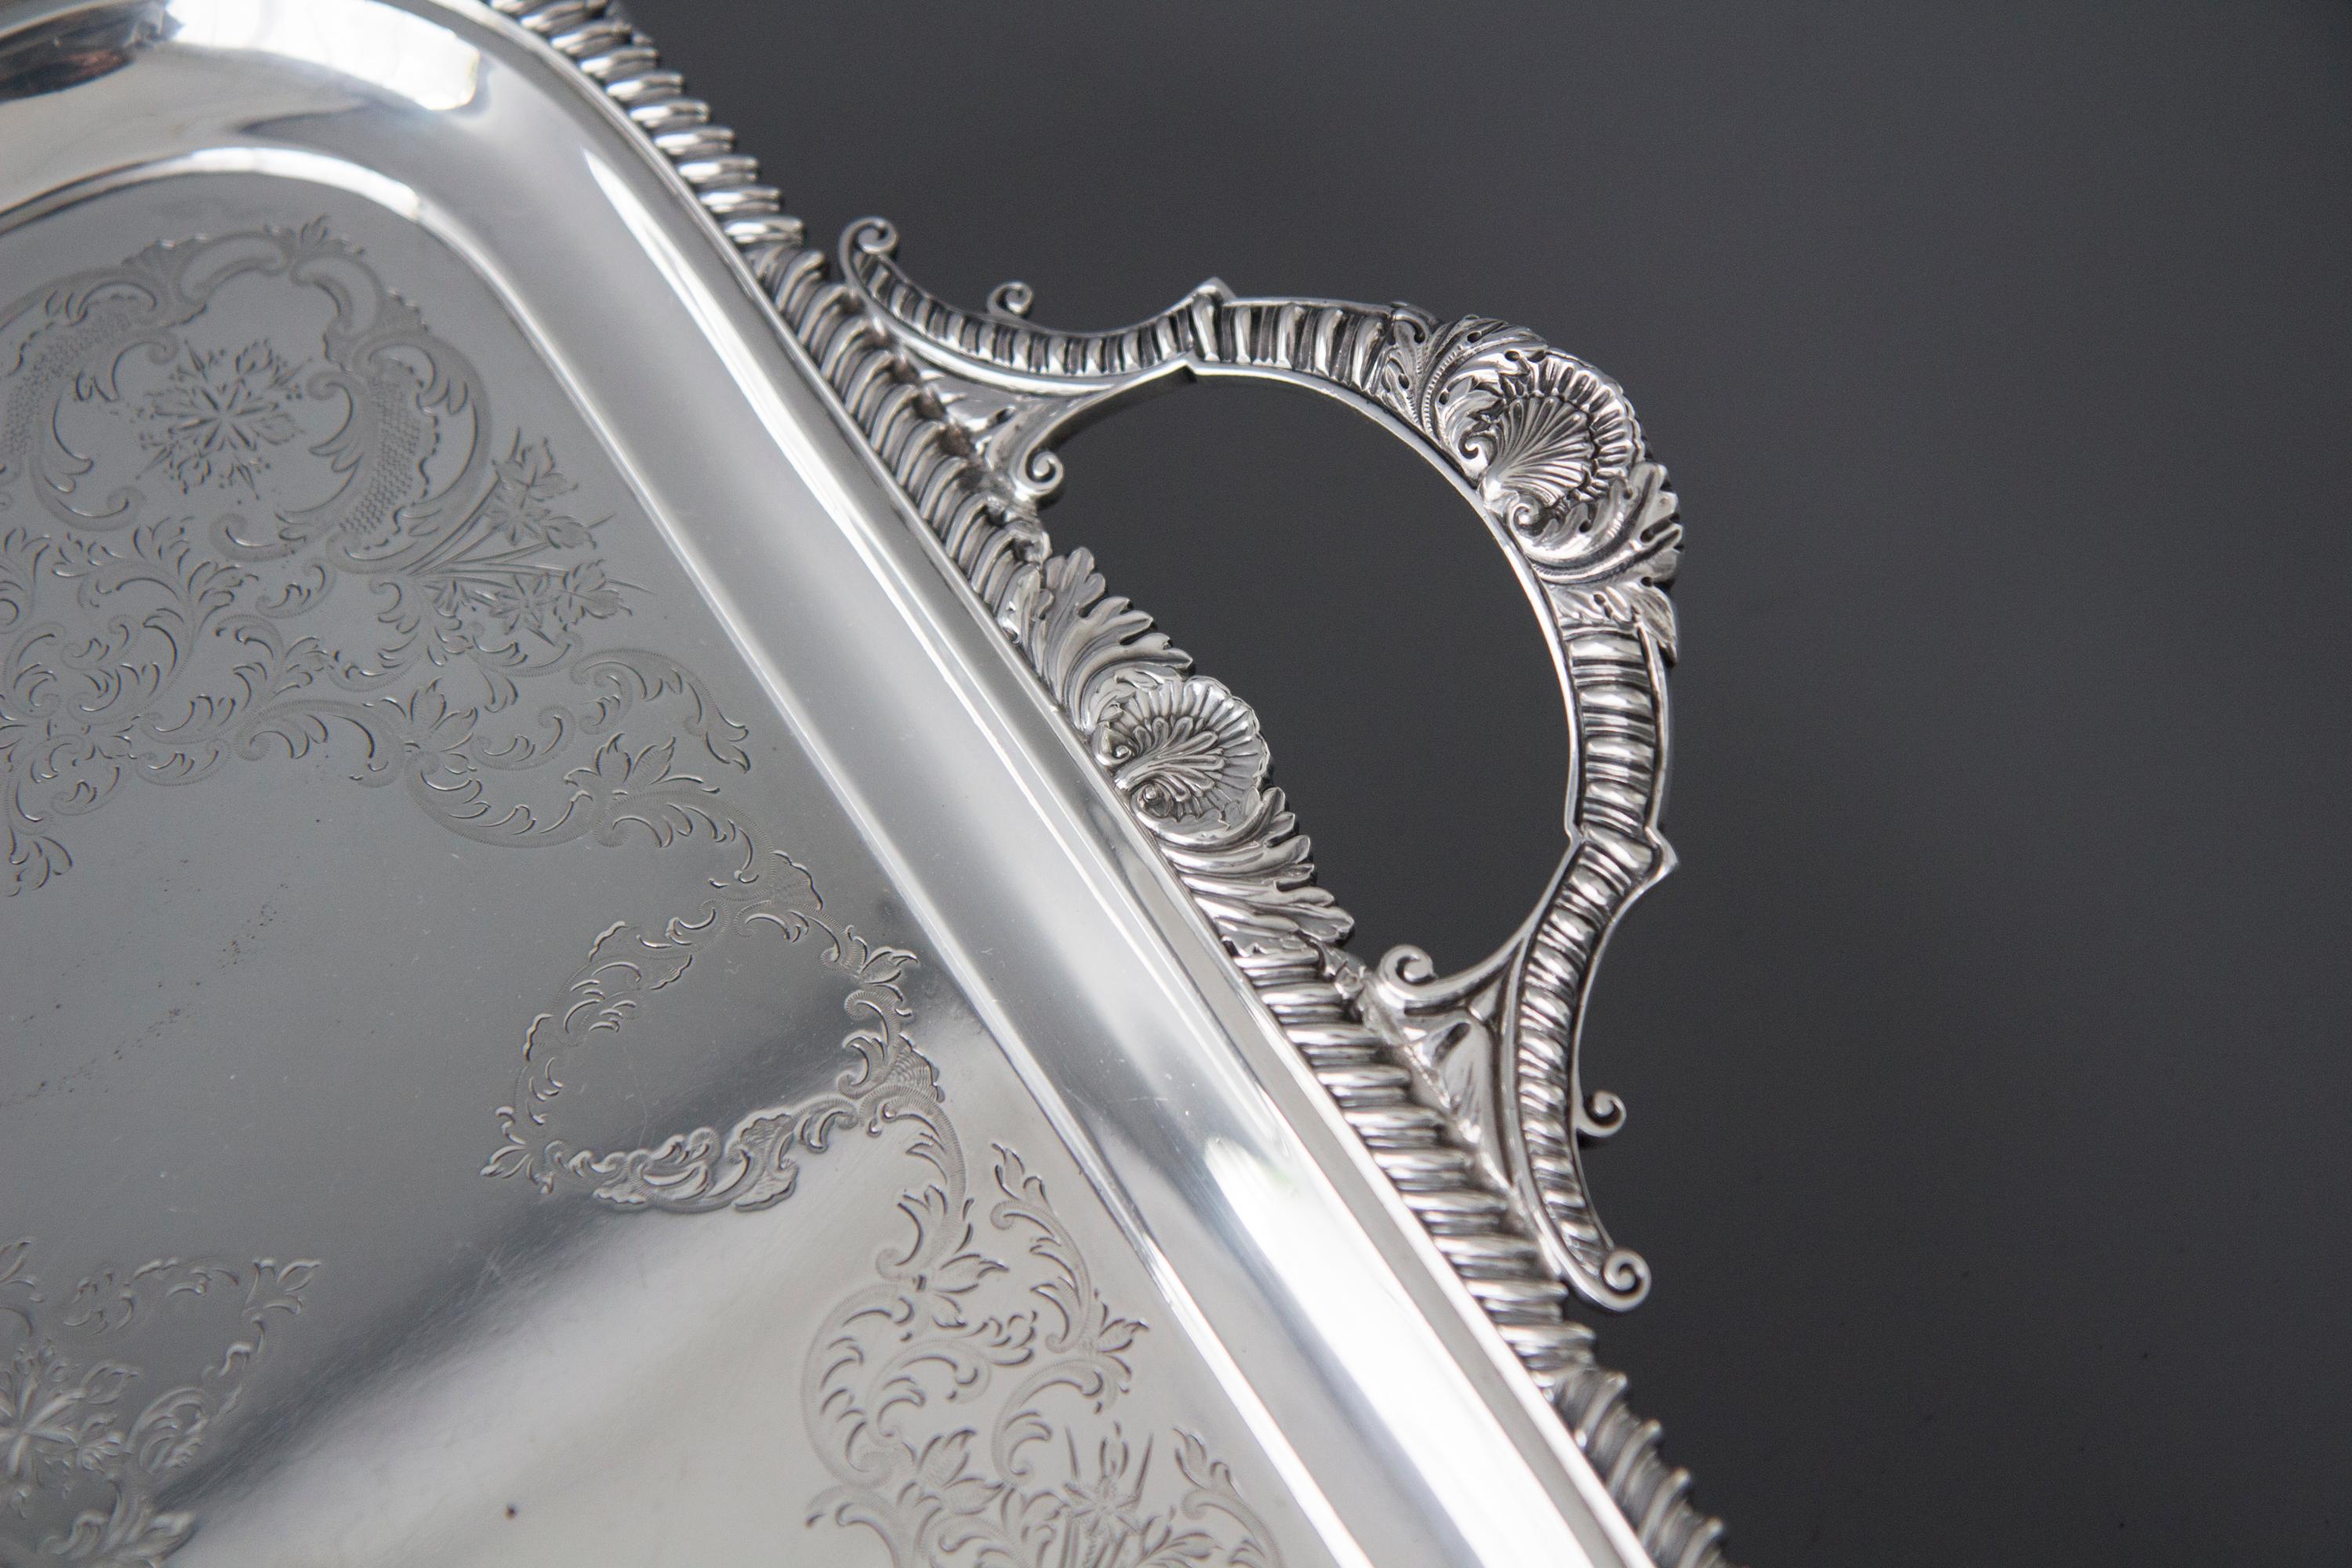 British Victorian Silver Tea or Drinks Tray, Sheffield, 1899 by Atkin Brothers